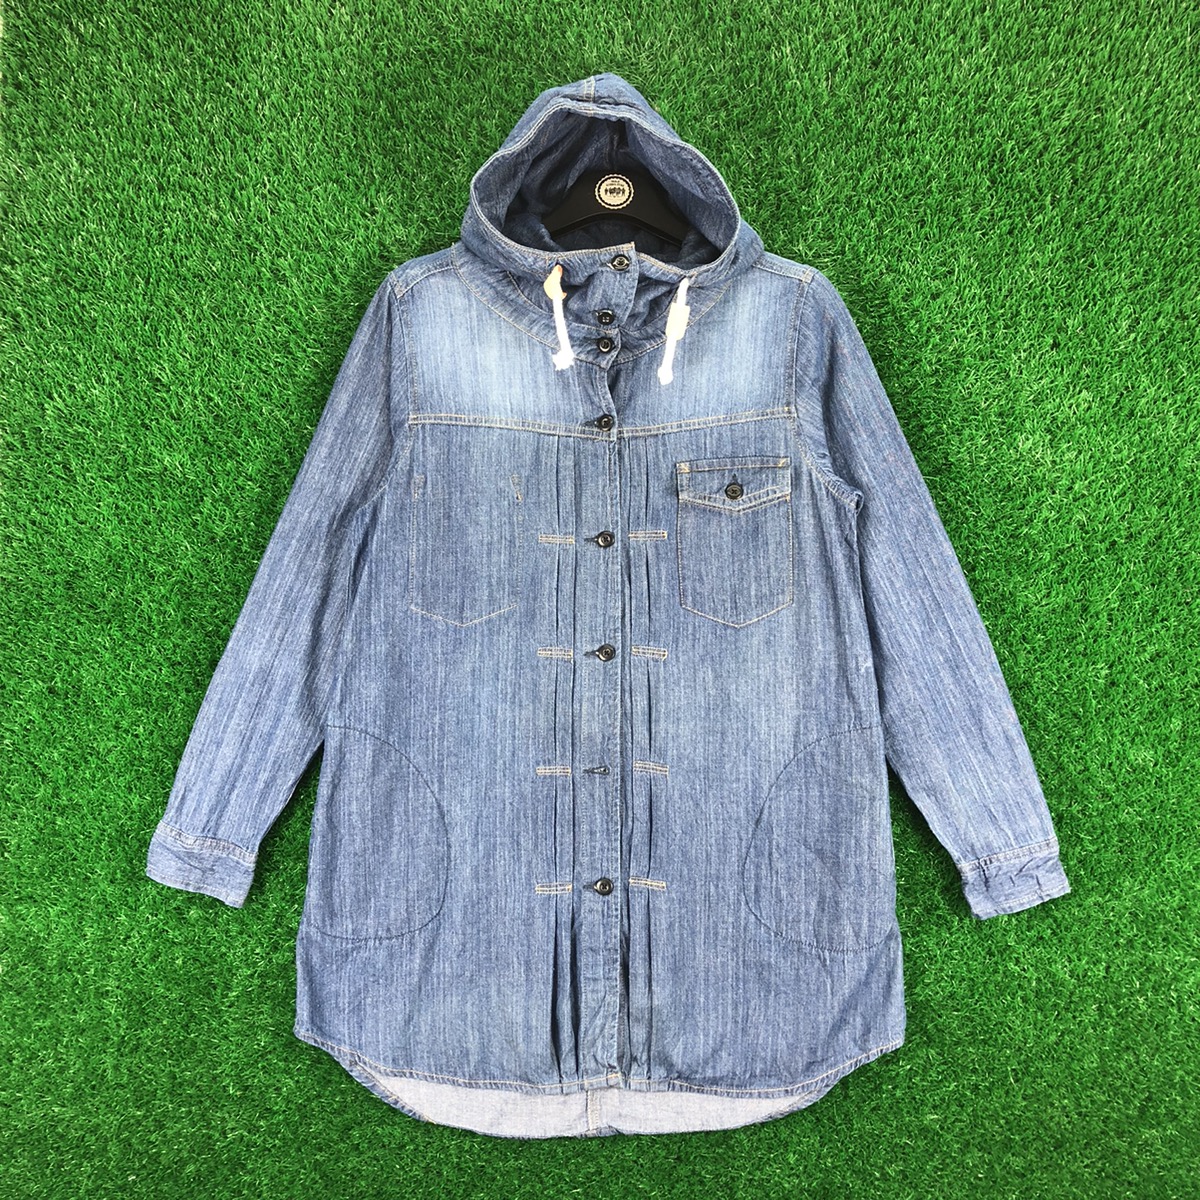 Archival Clothing - Long Blouse Hoodie Denim Button up by Quelle Chance - 1